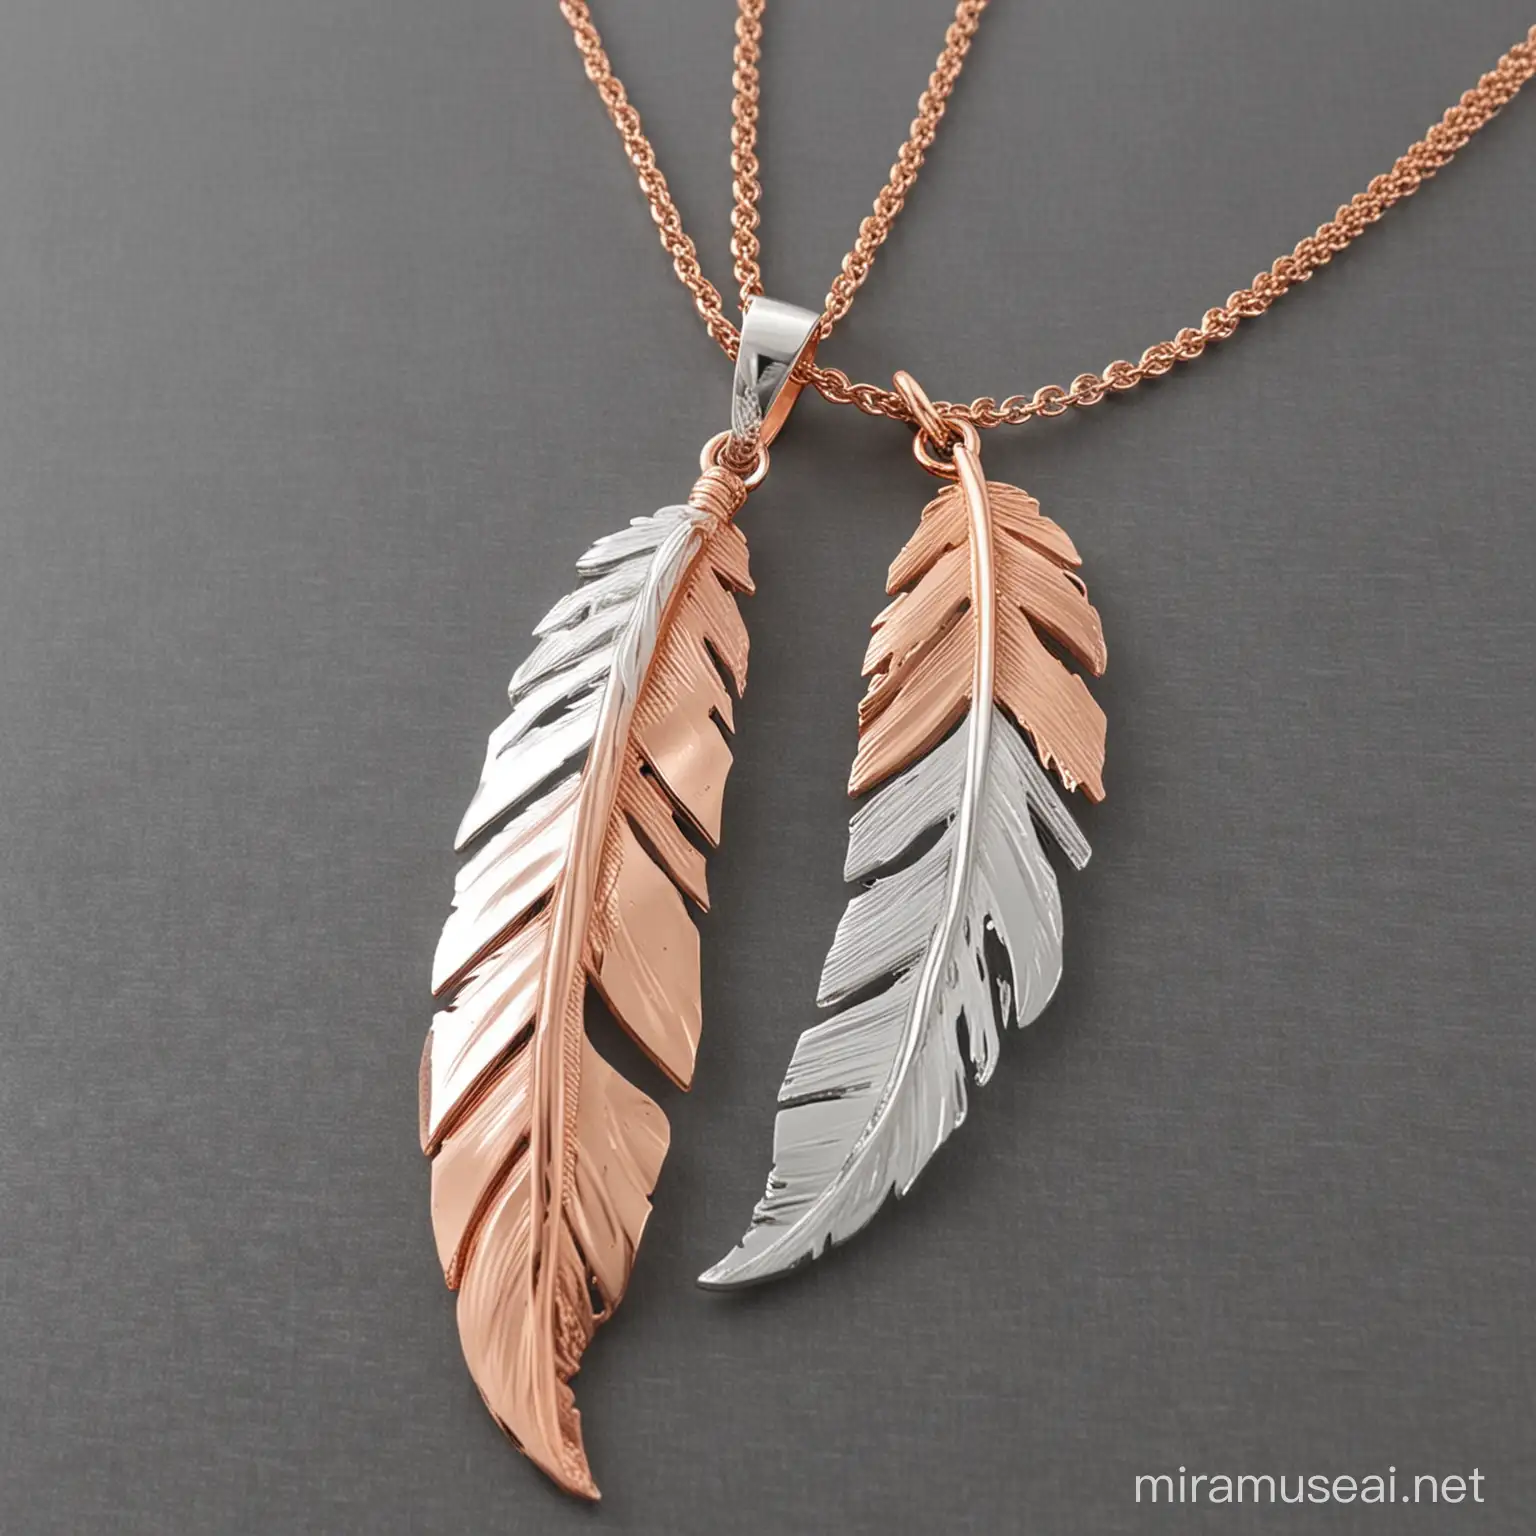 Elegant FeatherHollow White and Rose Gold Pendant Necklace